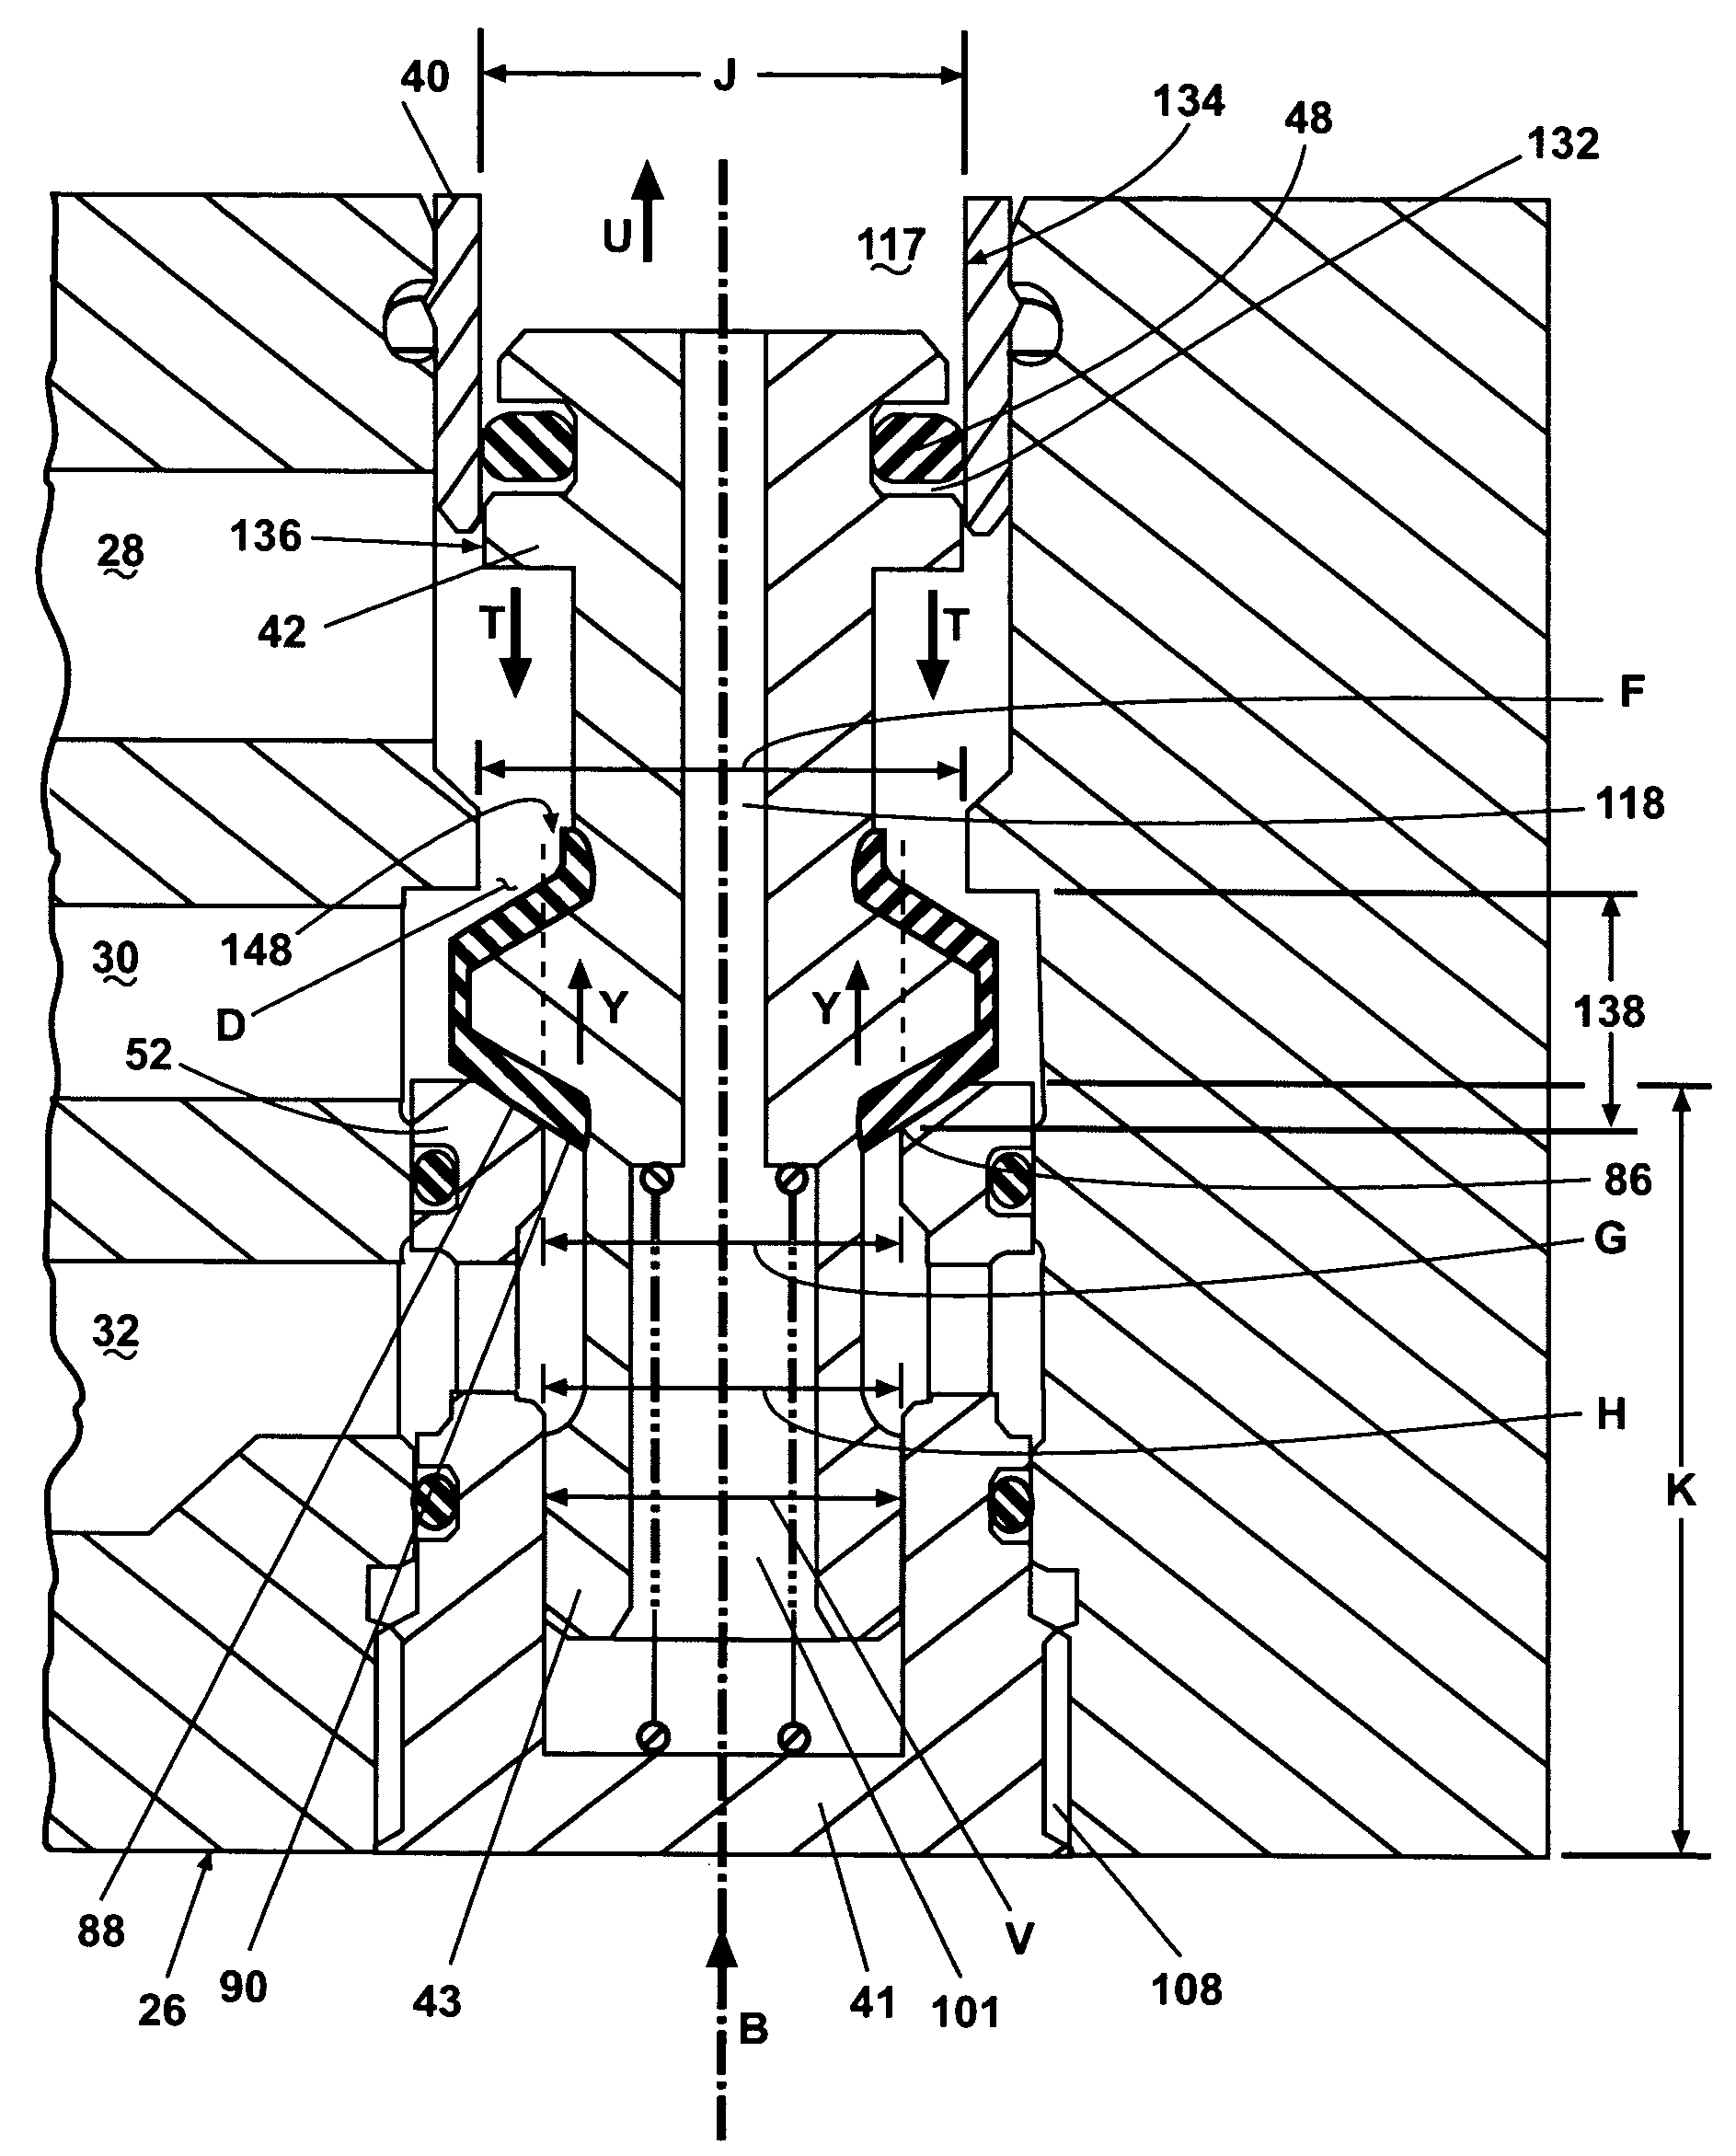 Directly operated pneumatic valve having a differential assist return